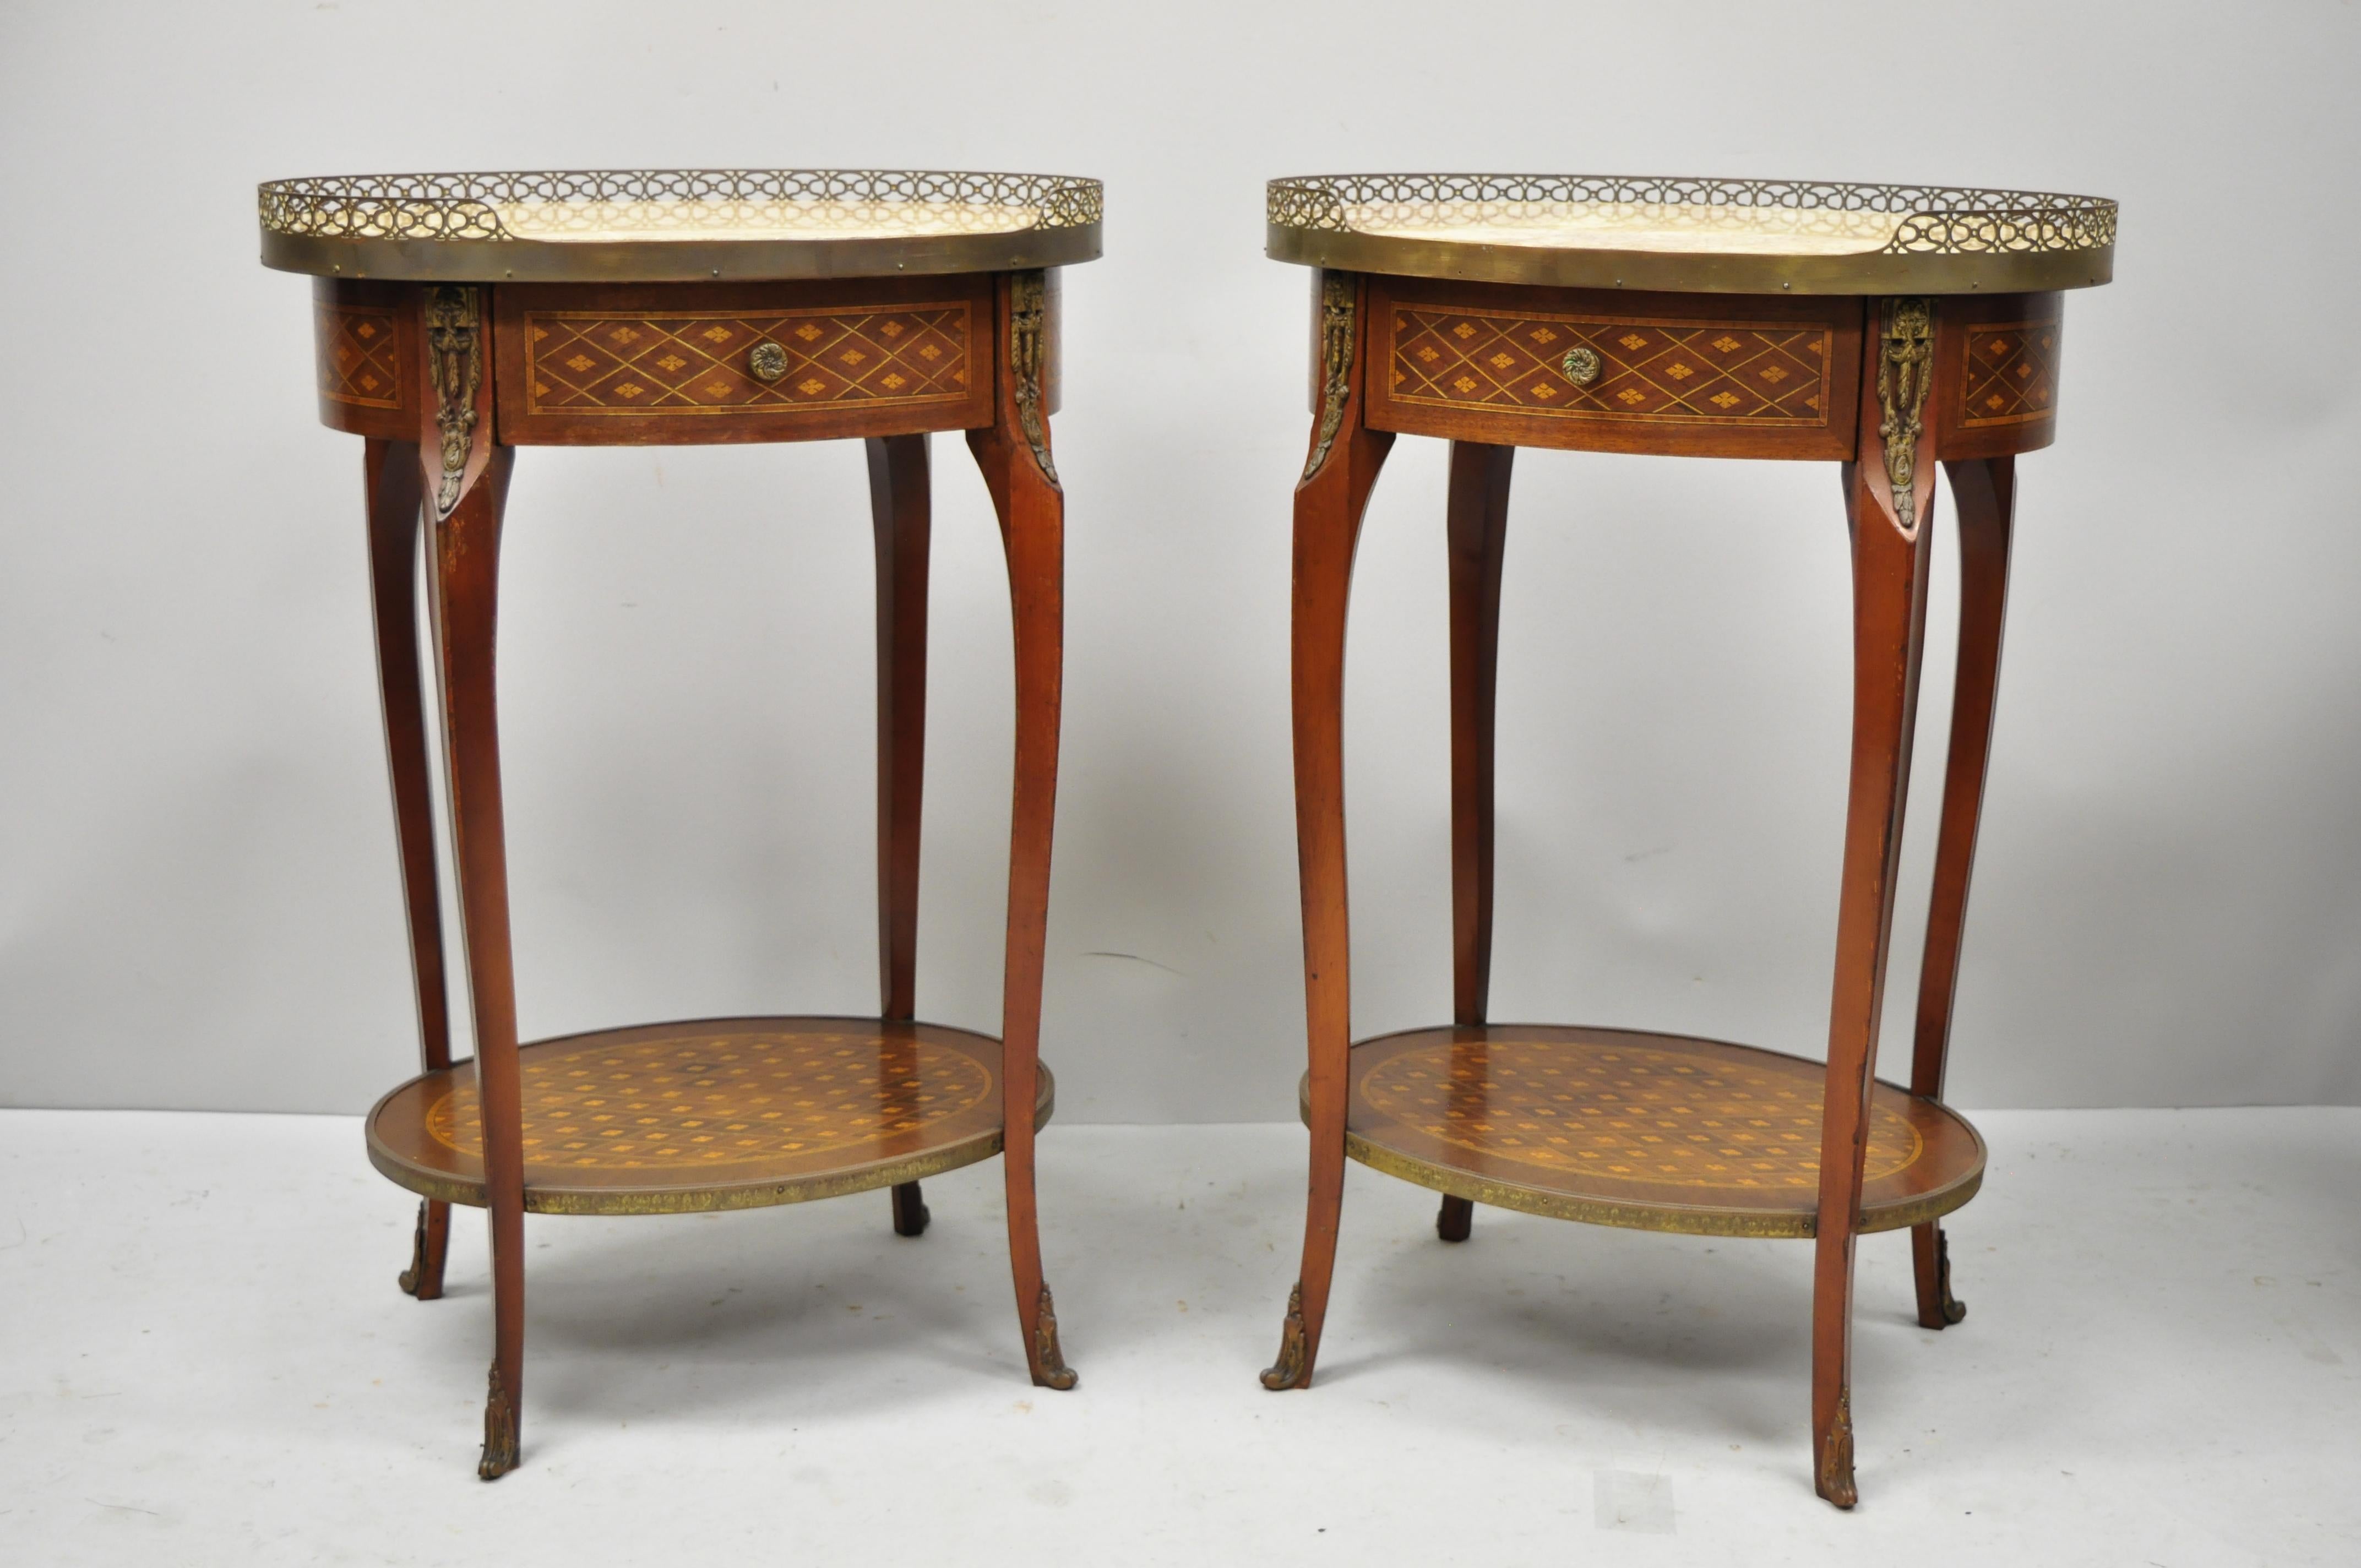 Pair of vintage French Louis XV style oval marble top Marquetry Inlay nightstands. Item features parquetry inlay, oval marble top, beautiful wood grain, finished back, 1 dovetailed drawer, cabriole legs, great style and form, circa early to mid-20th